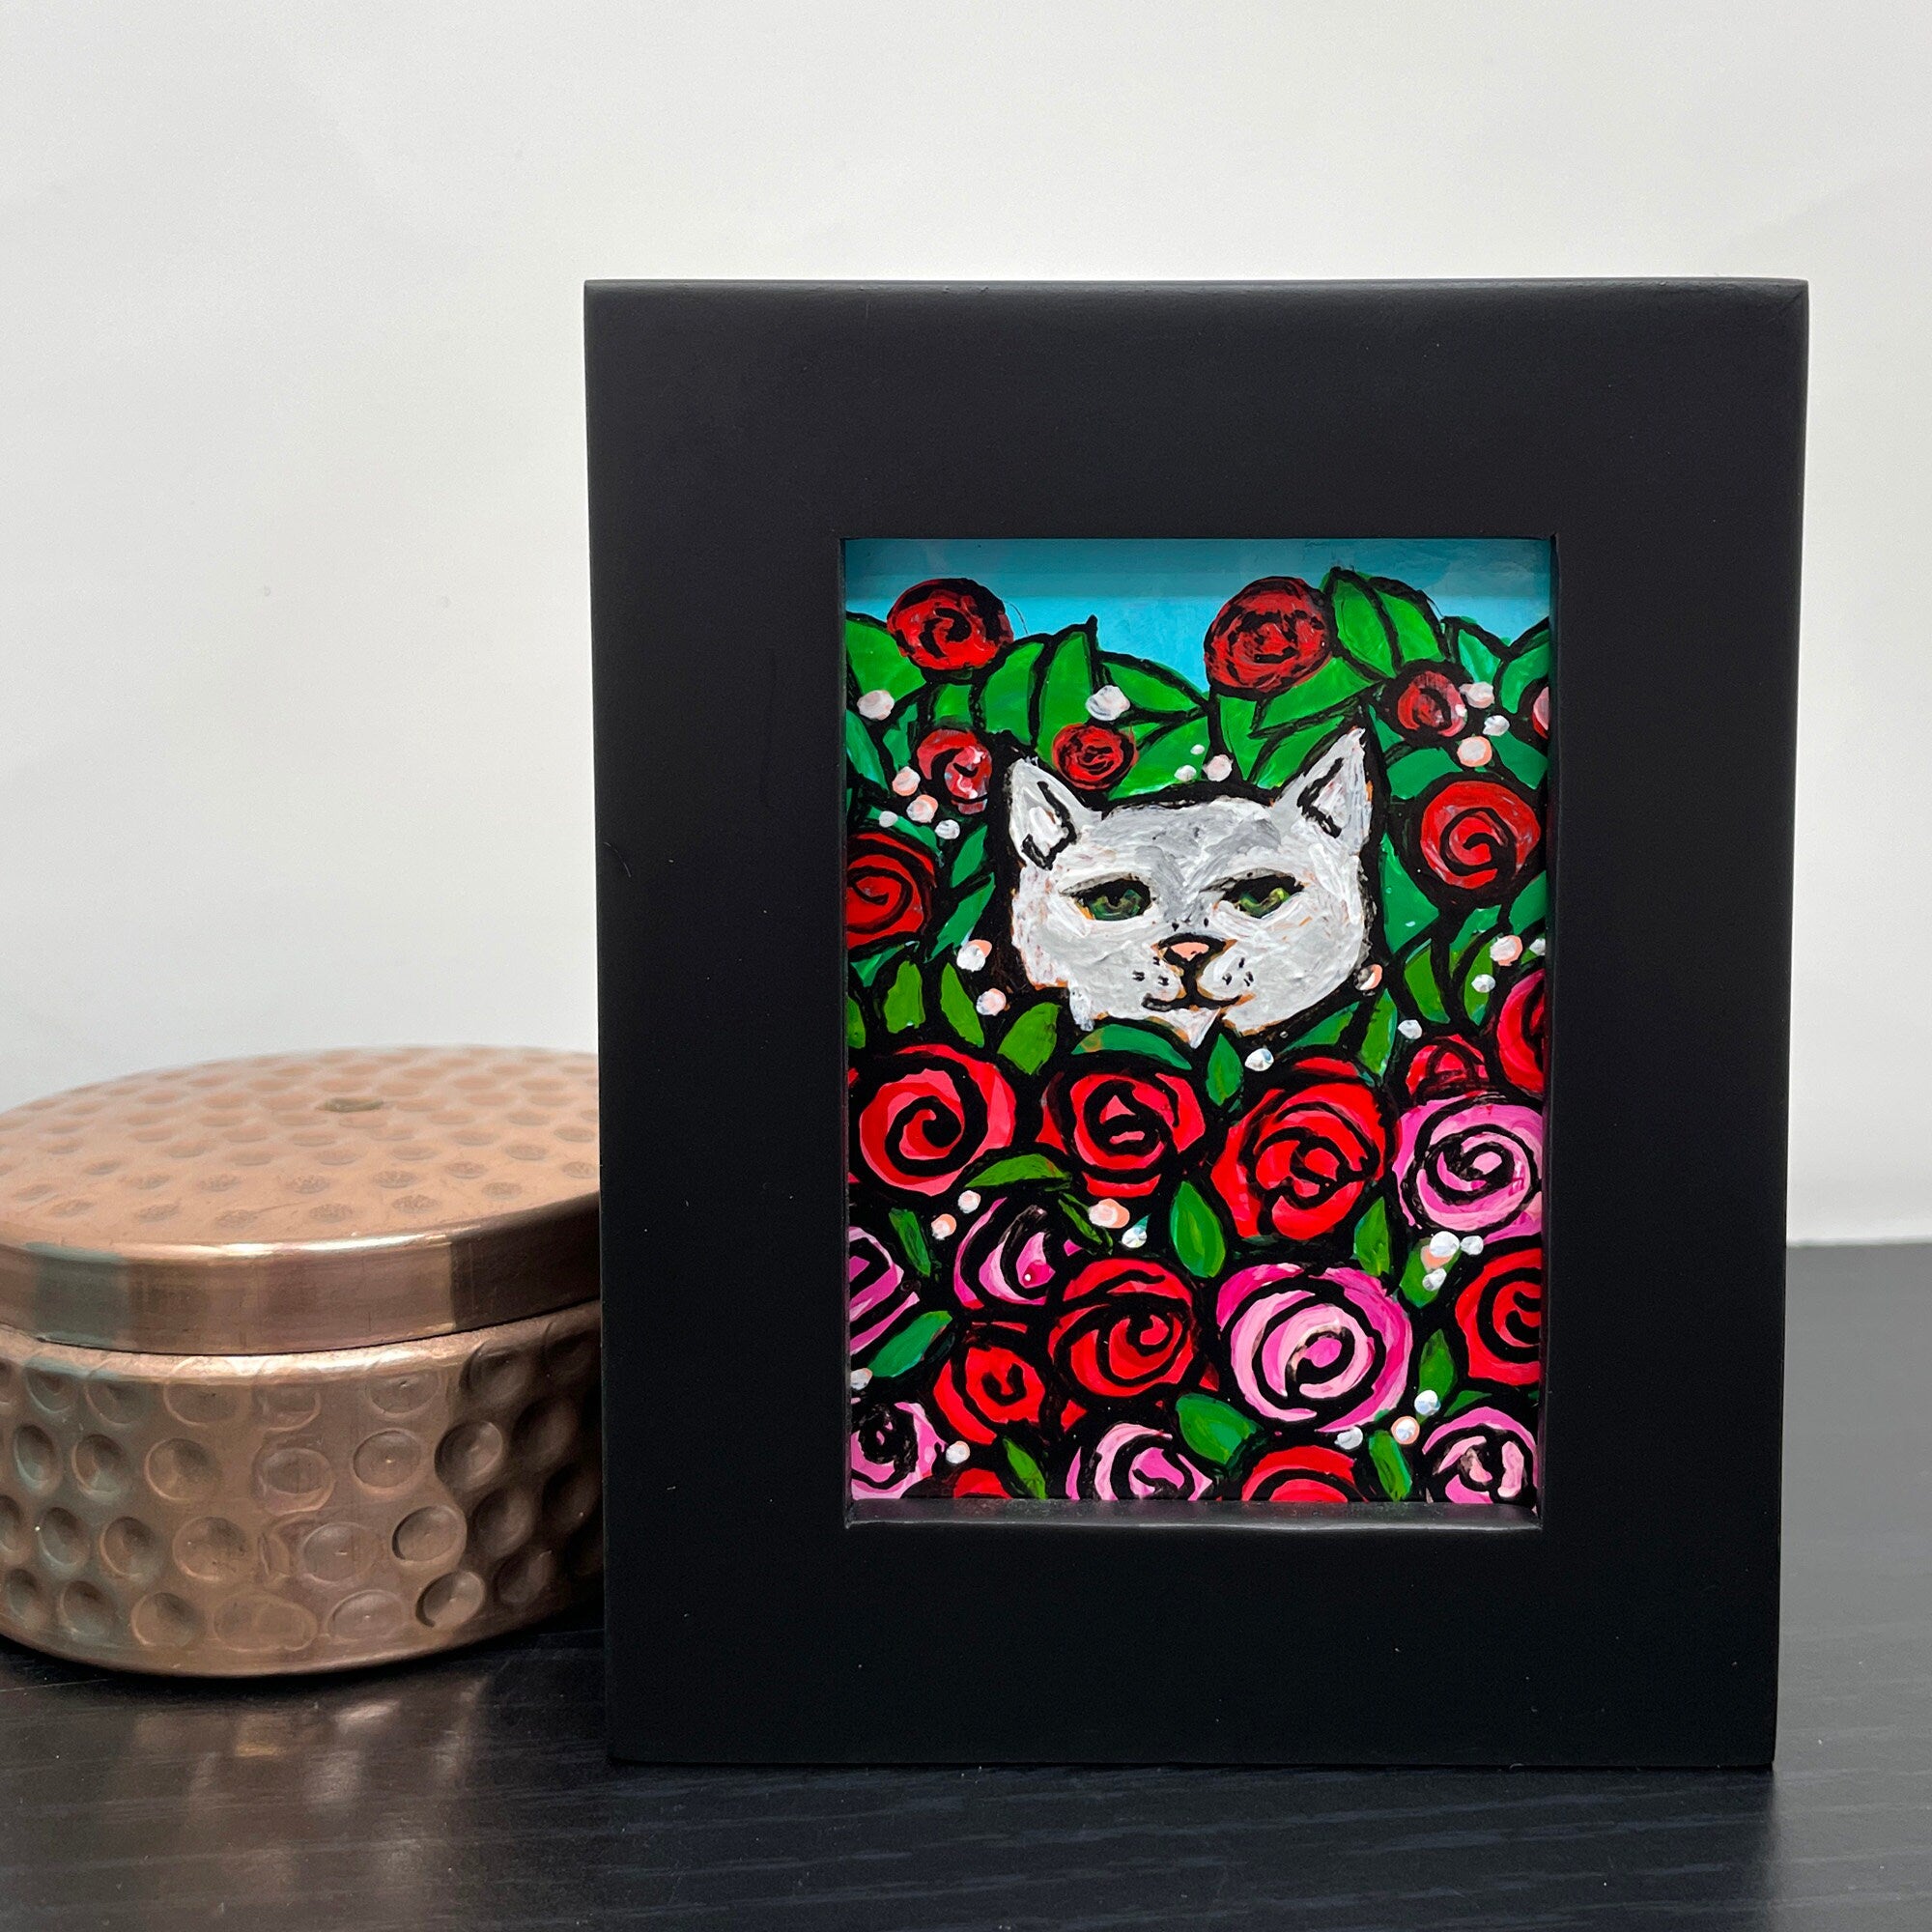 Rose Kitty II painting sitting next to copper trinket box on black table